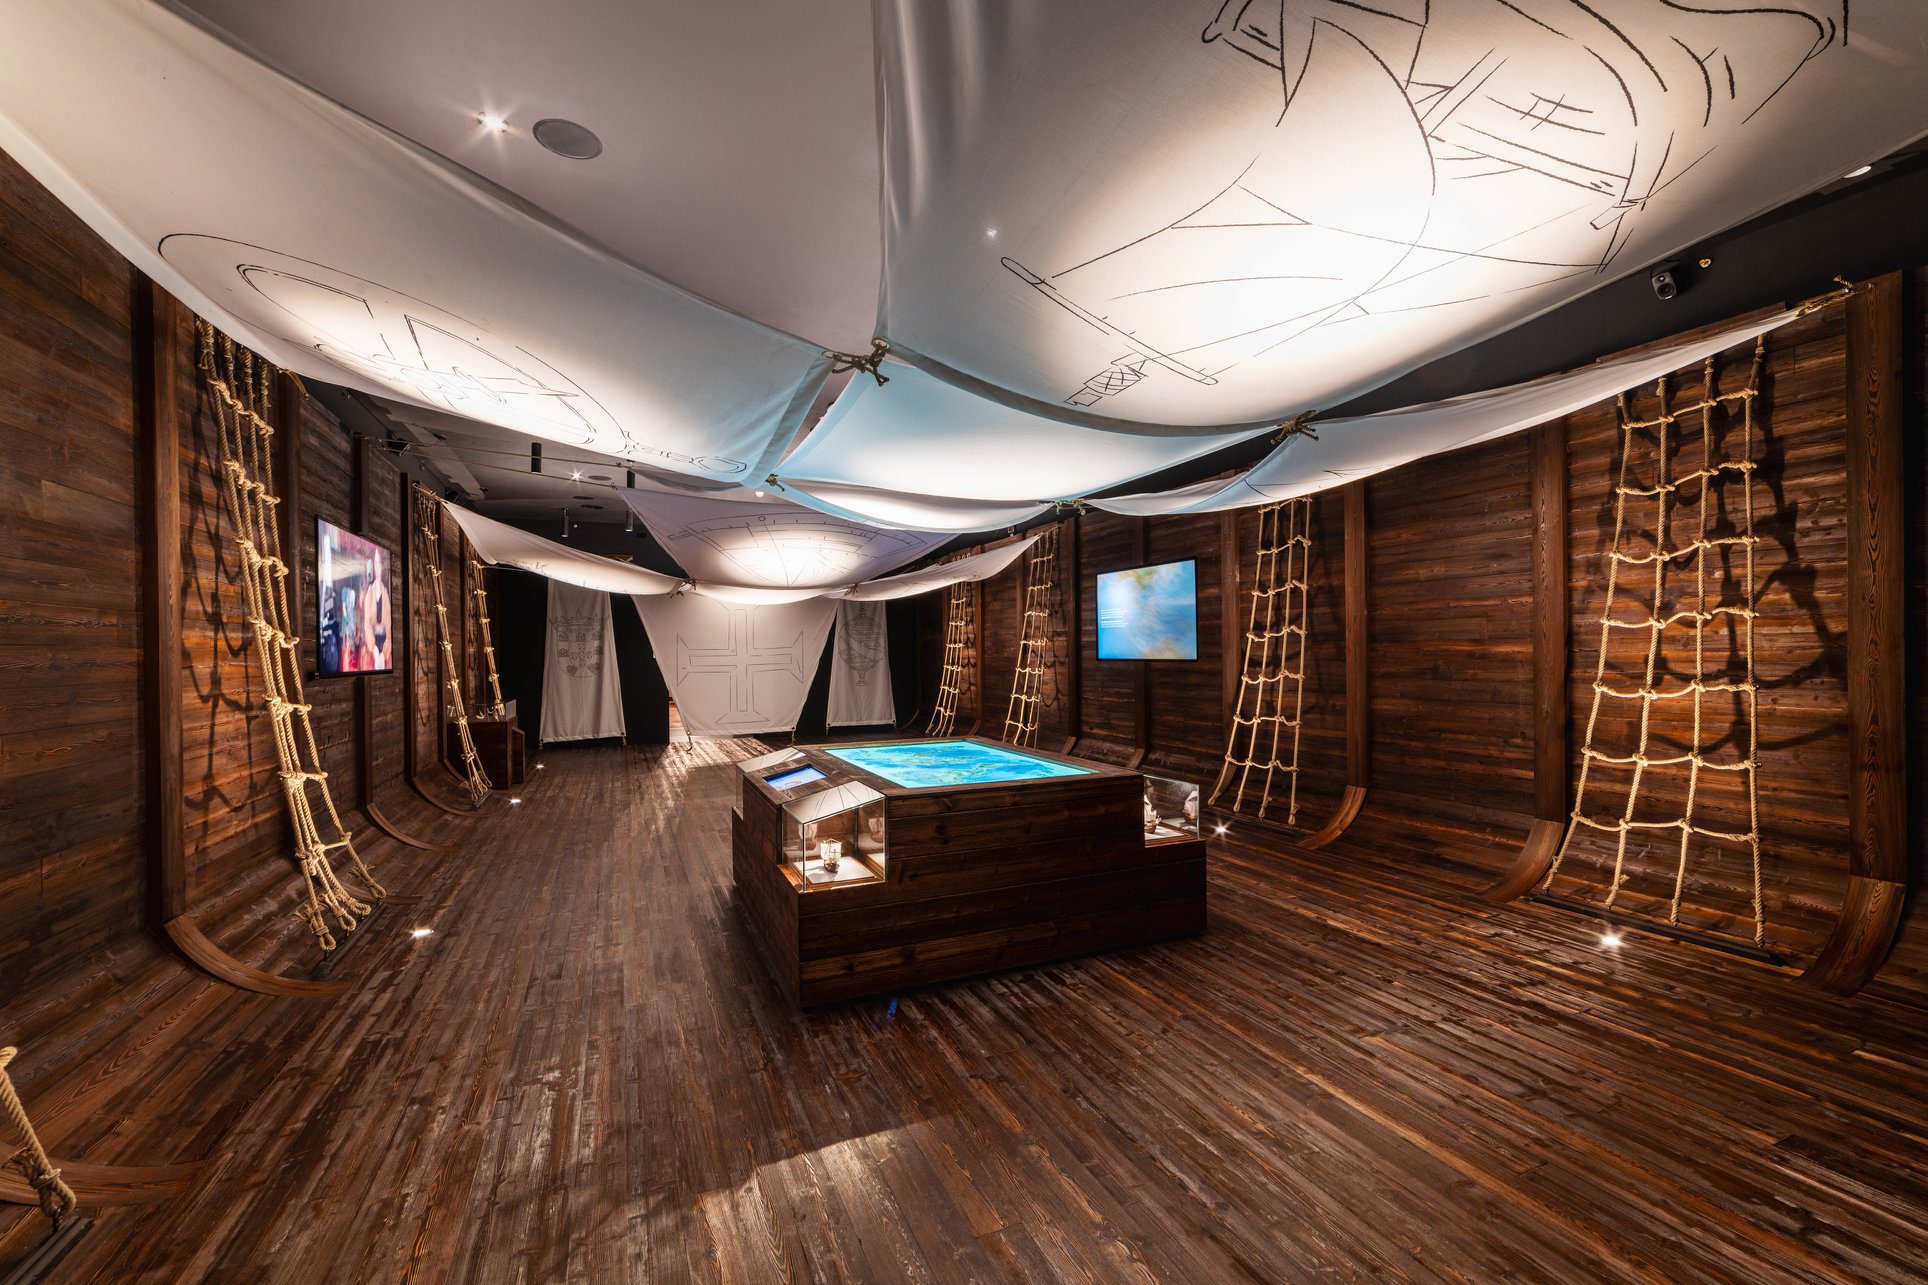 A room made to look like a ship with a display table in the middle